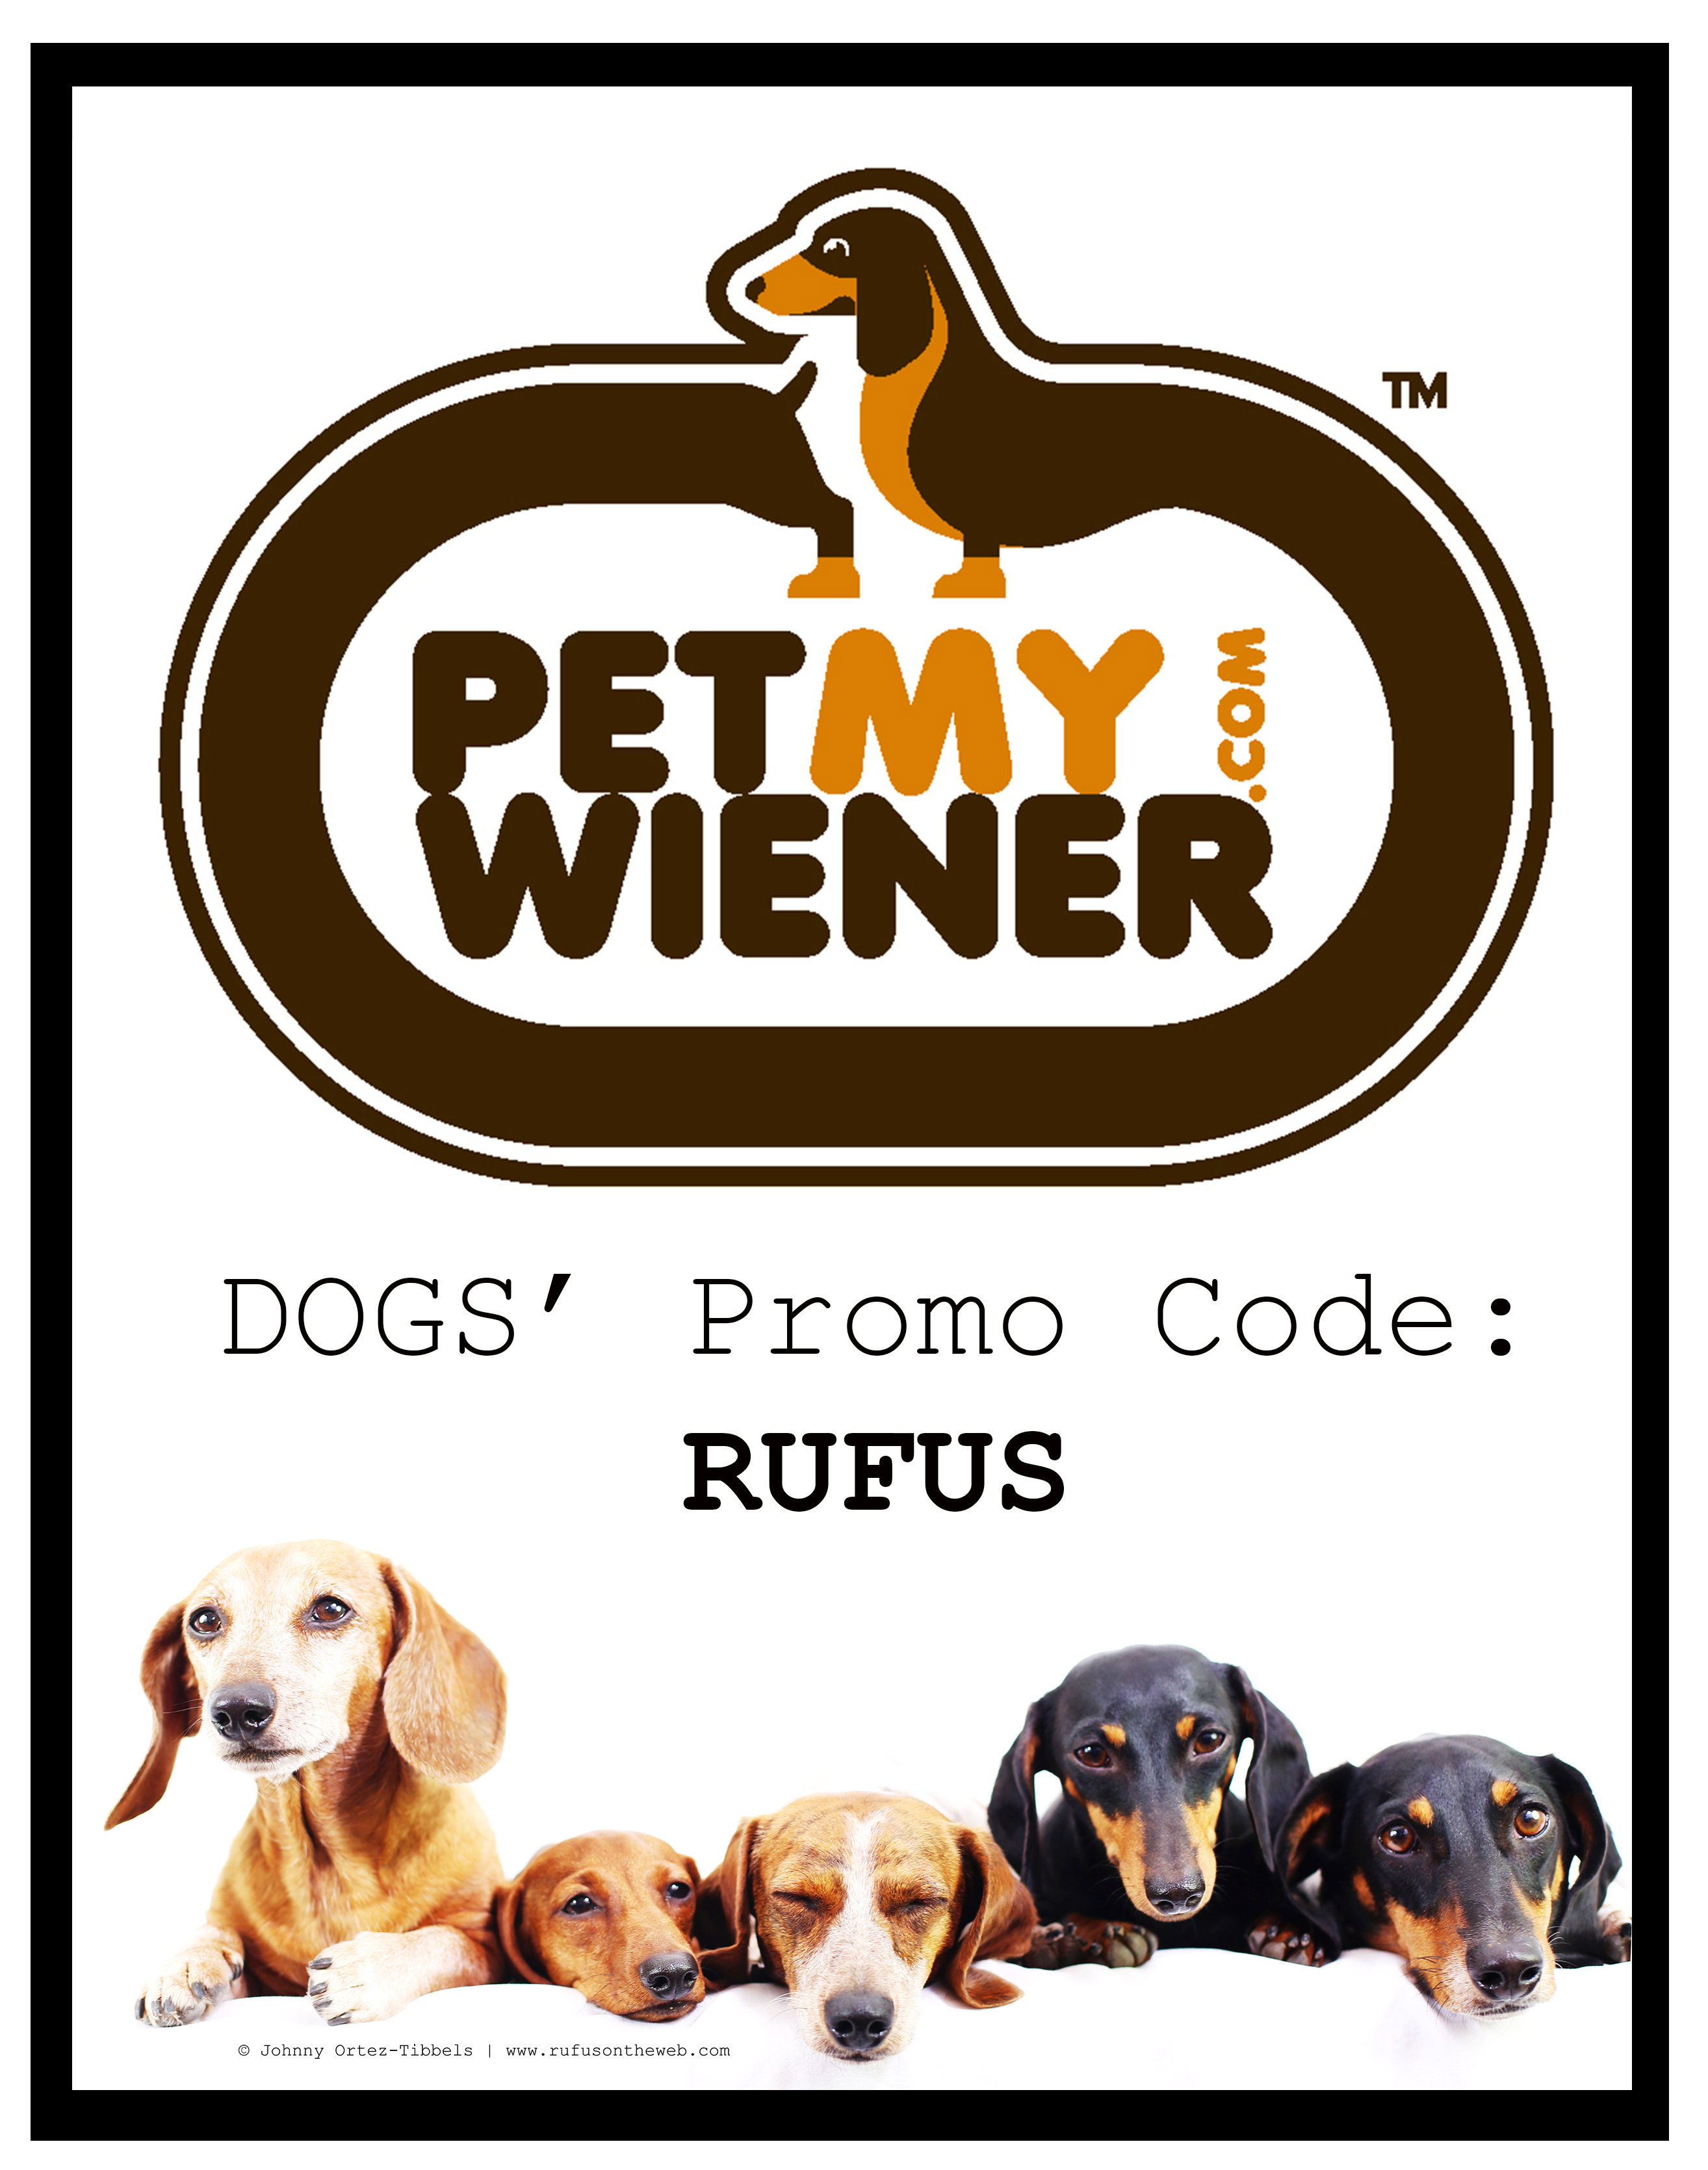 Quick Buy Program For Tagged Pets Autobuy